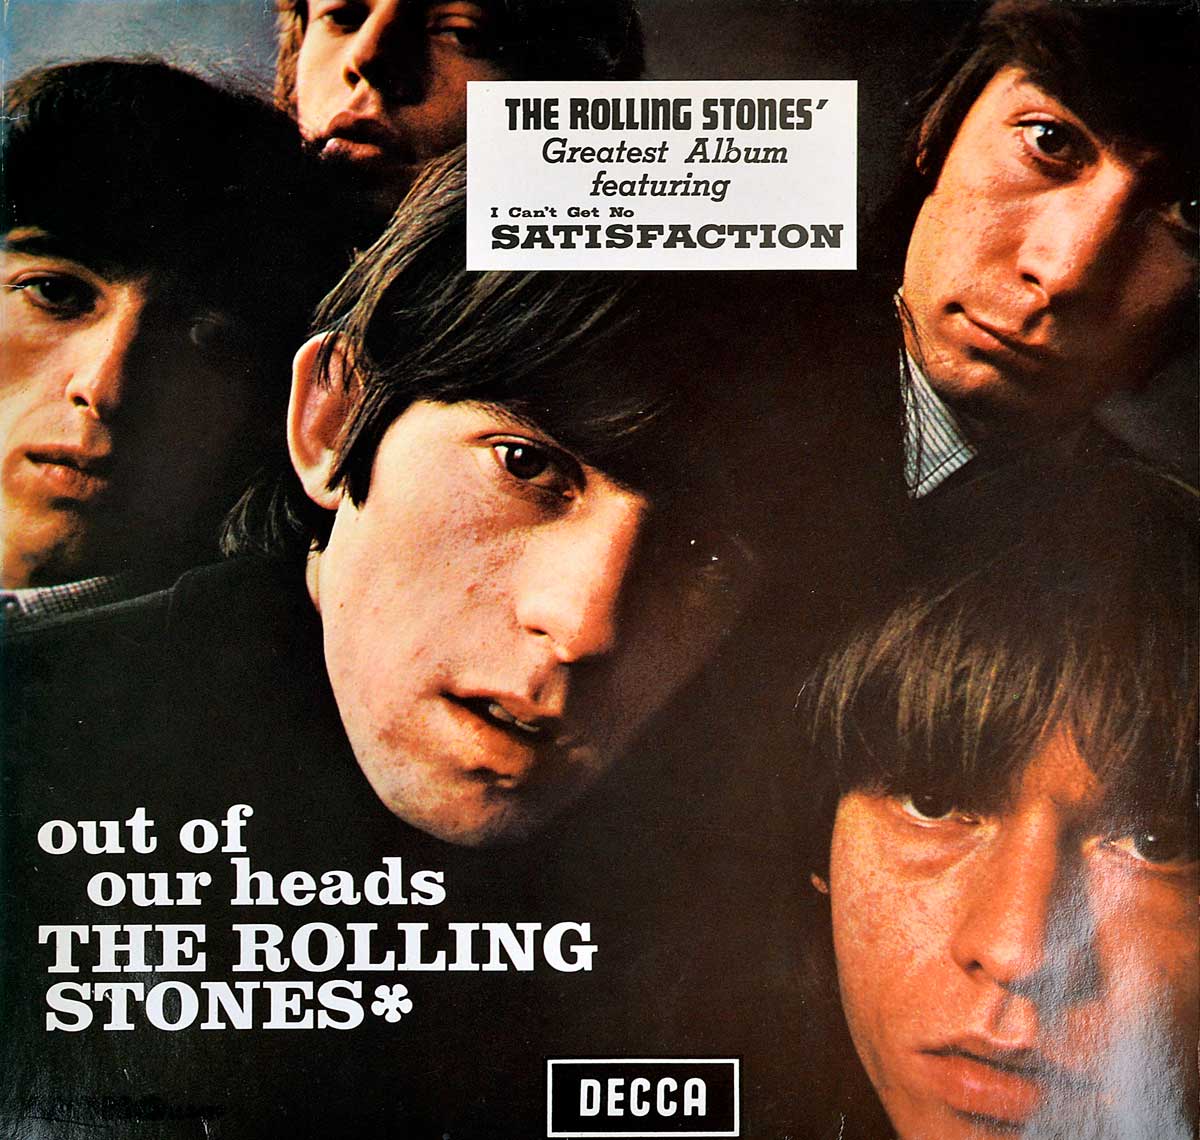 Album Front Cover  Photo of "THE ROLLING STONES – Out Of Our Heads" 